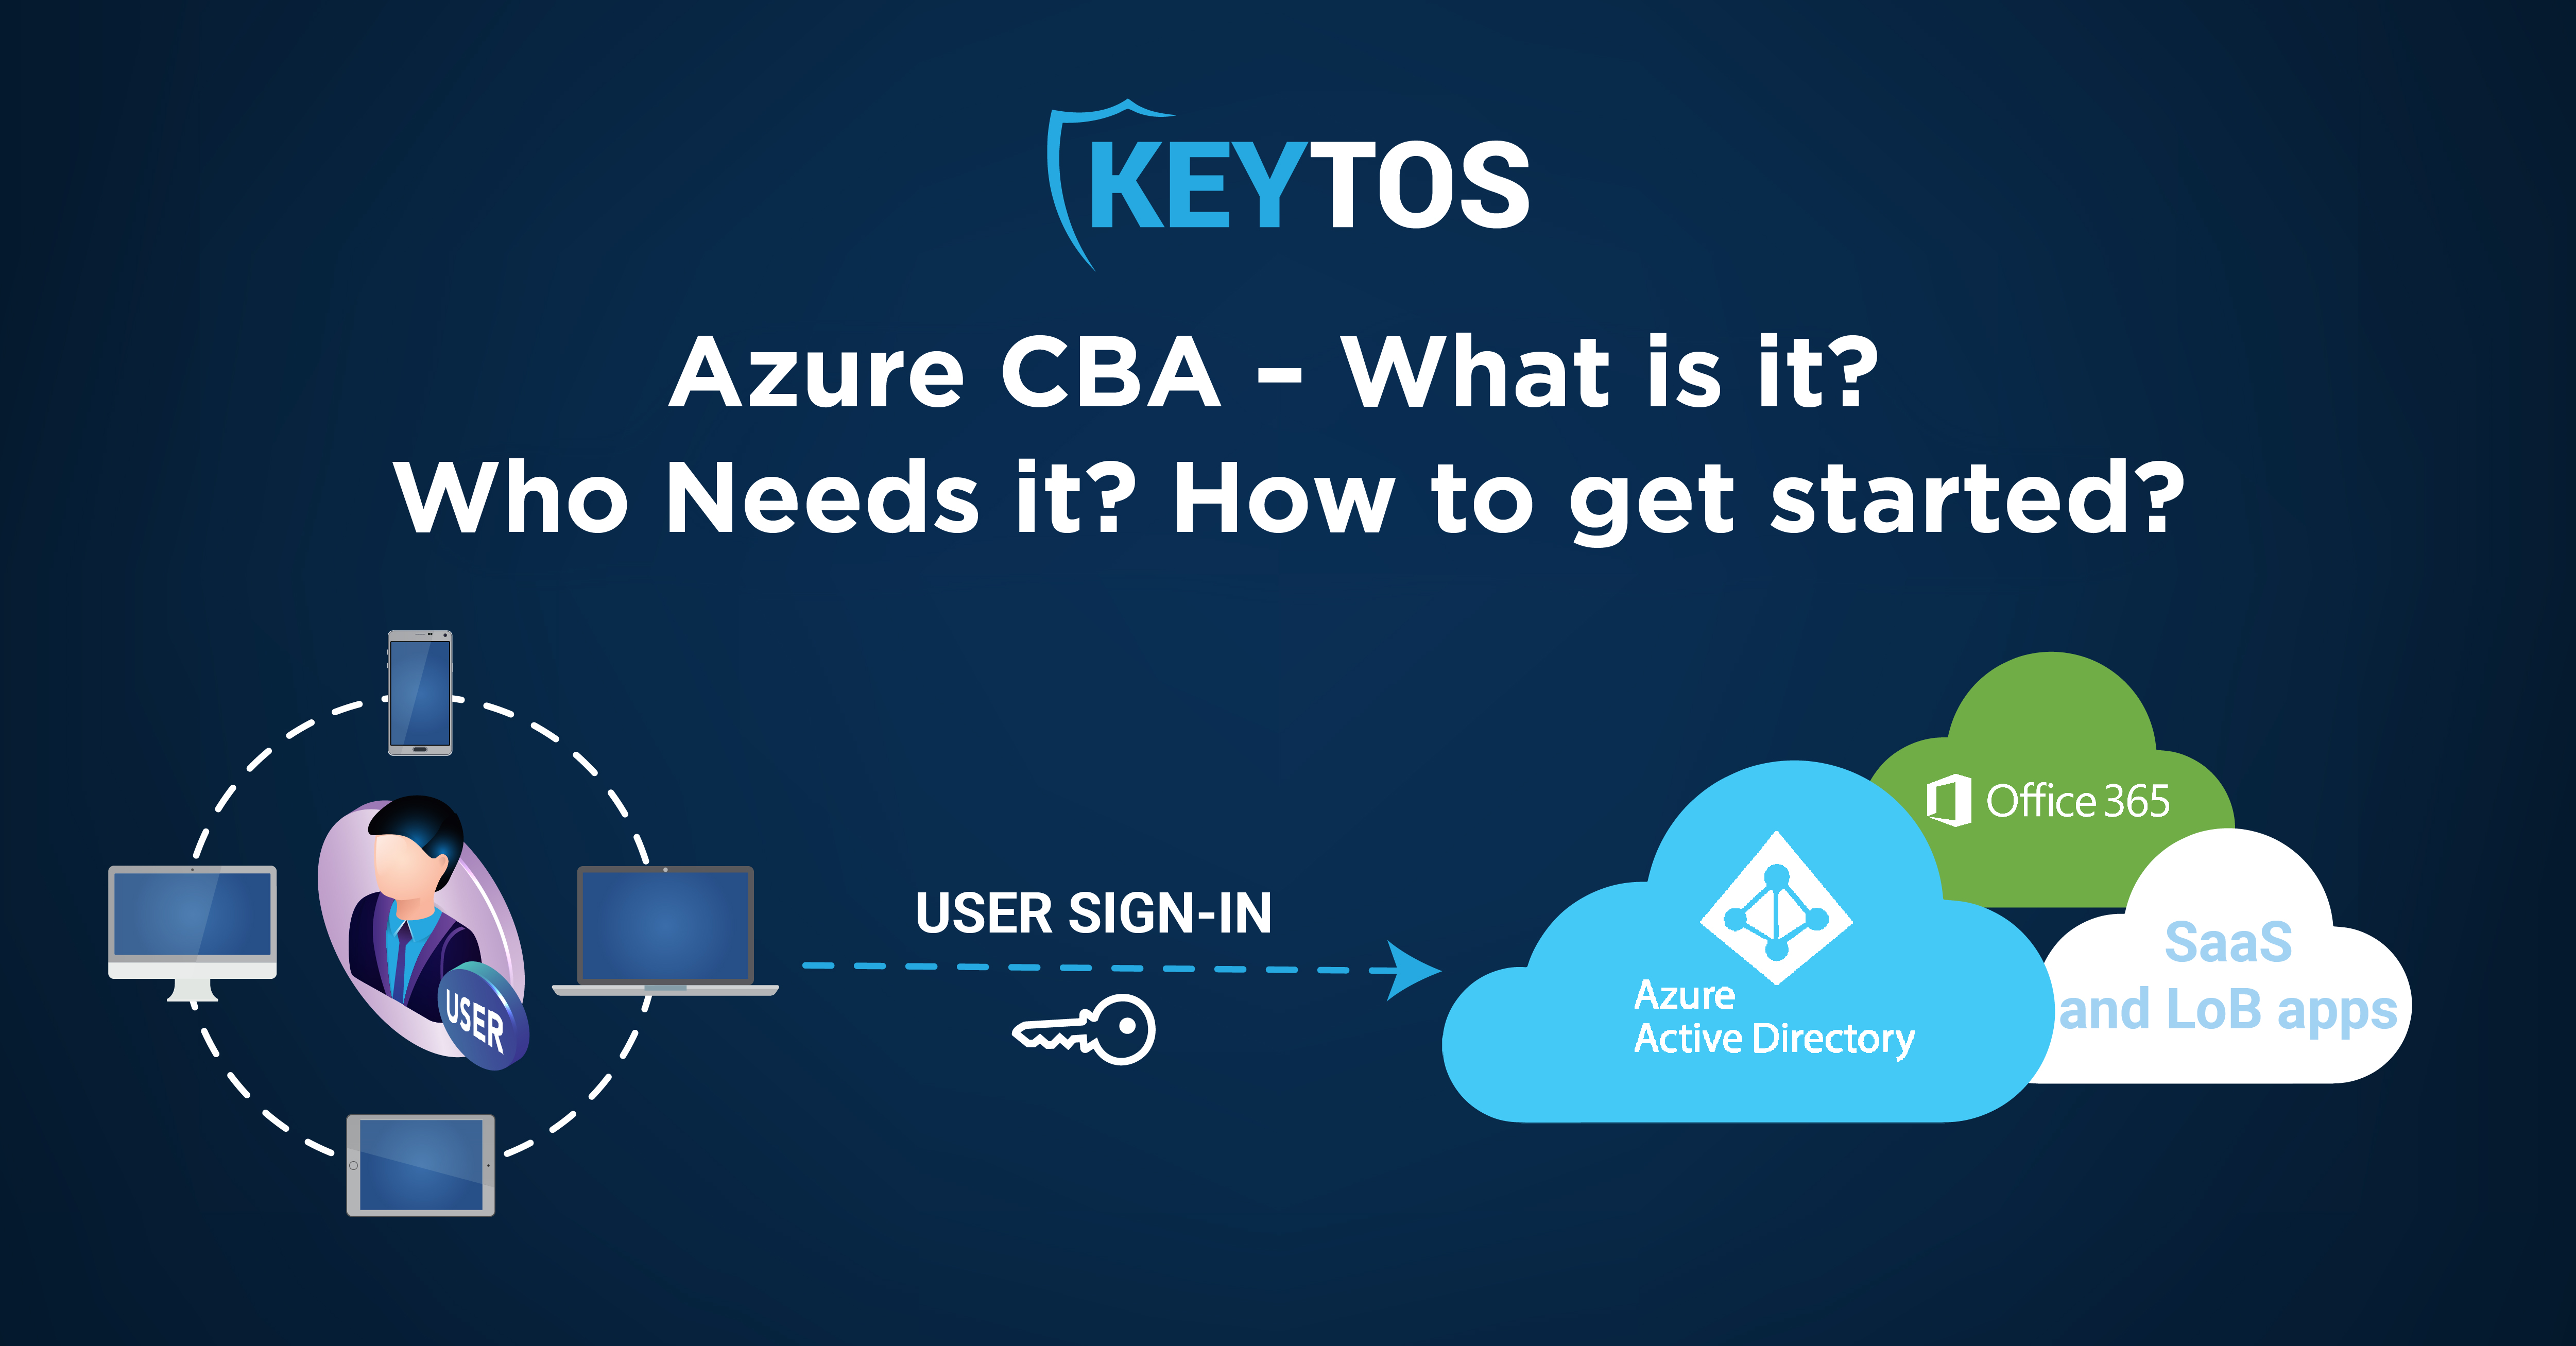 Azure CBA – What is it? Who Needs it? How to Get Started?